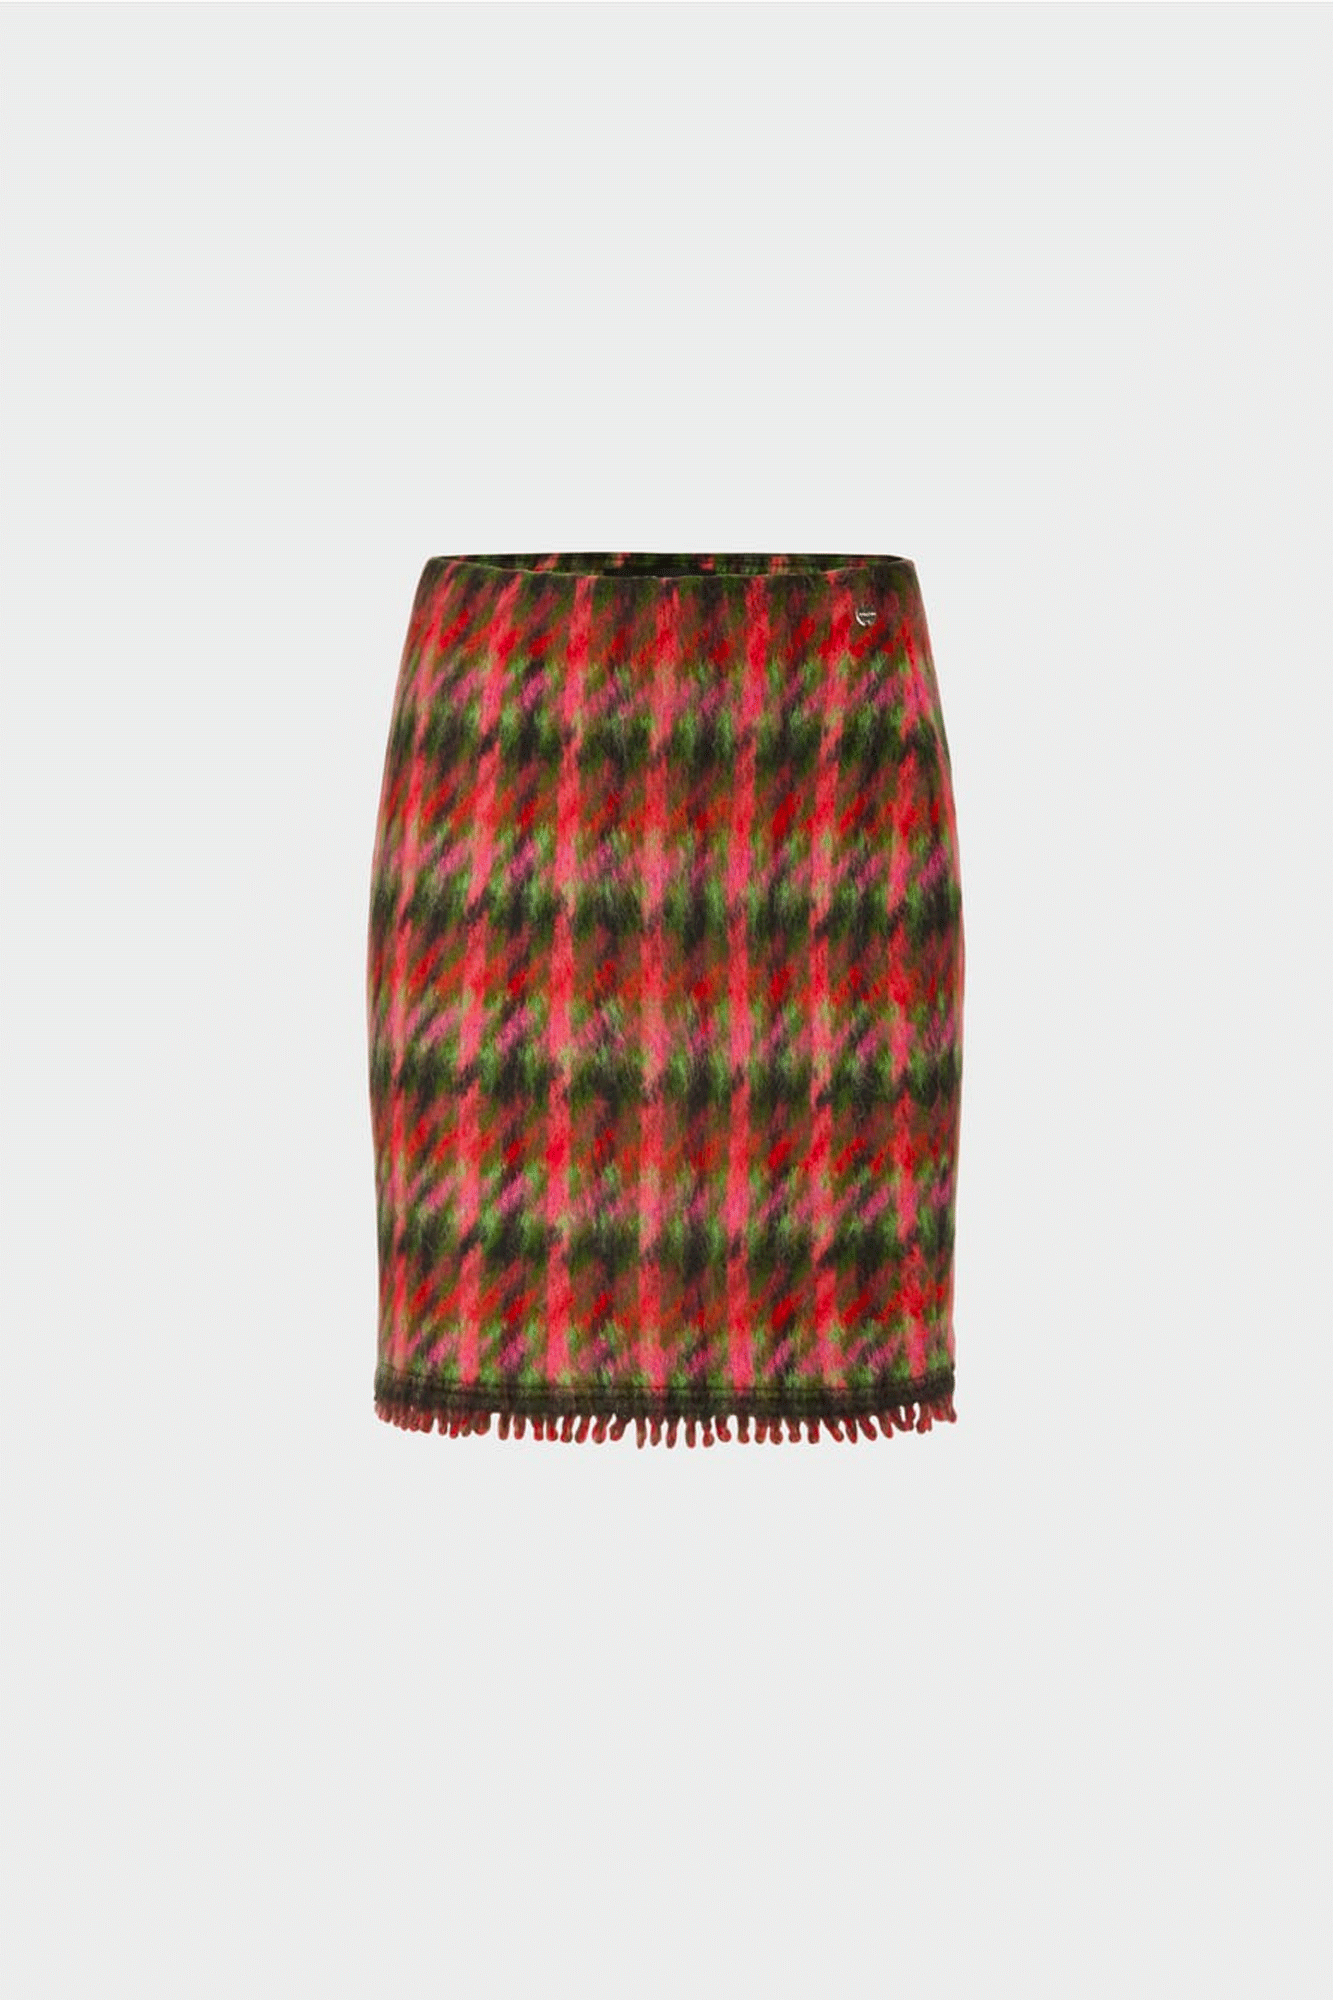 The Night Train Skirt from Marc Cain is crafted with quality in mind. Its sophisticated yarn blend contains mohair for a hairy surface that blurs the contours of the check pattern. The knitted skirt is made and embellished in Germany using the latest technologies, before being sewn together at European partner companies. Its interior waistband and fringed border finish the look.